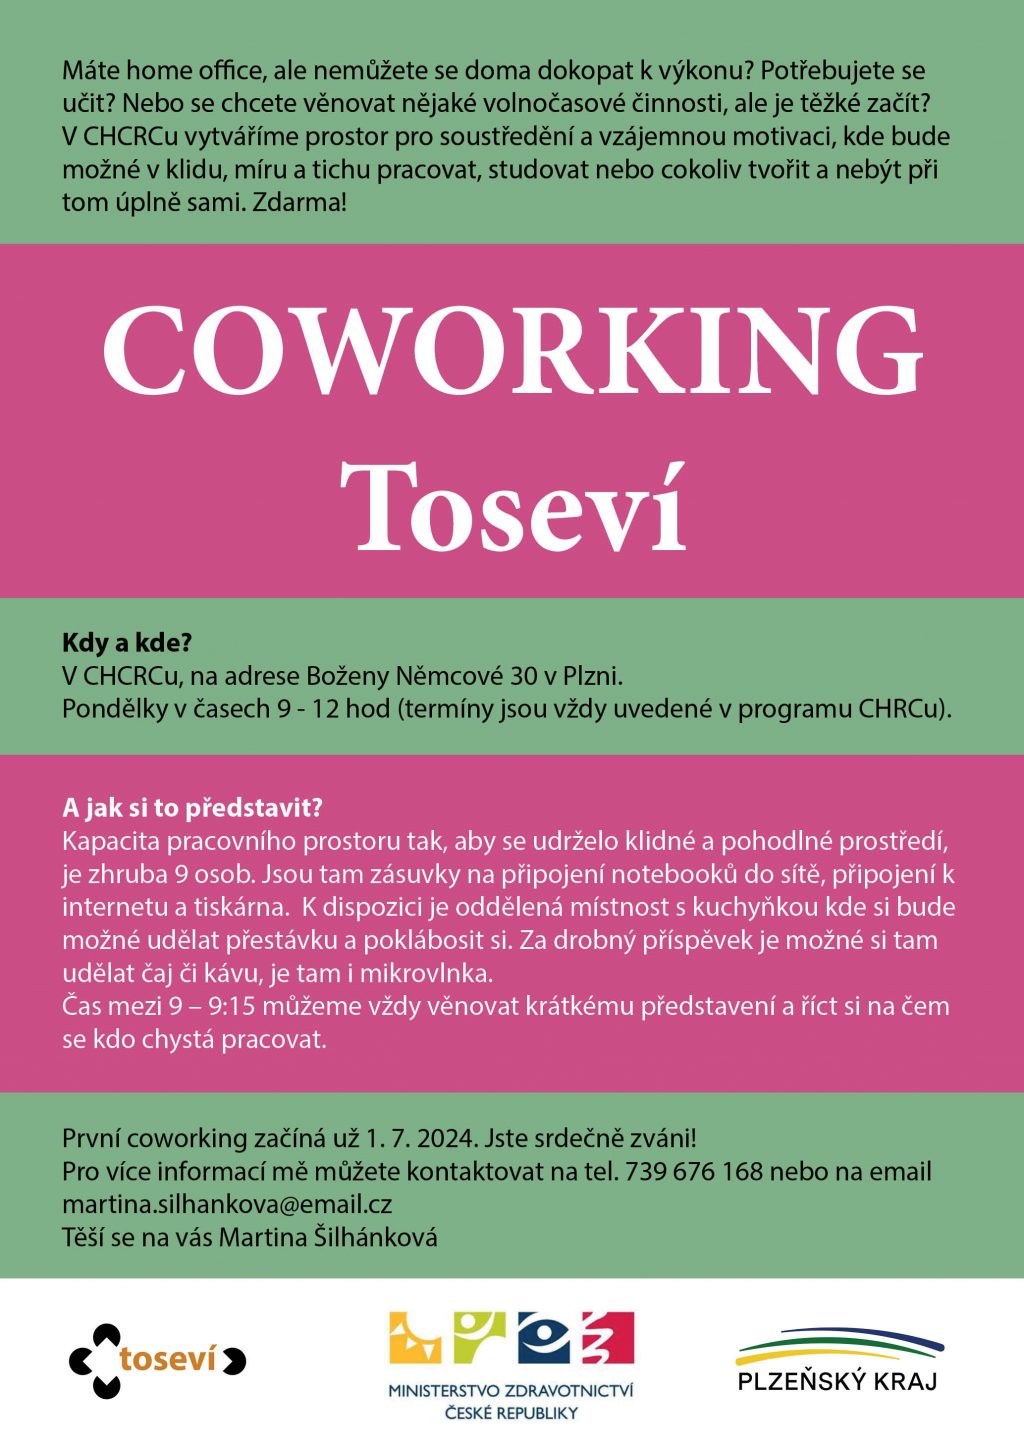 Coworking Toseví